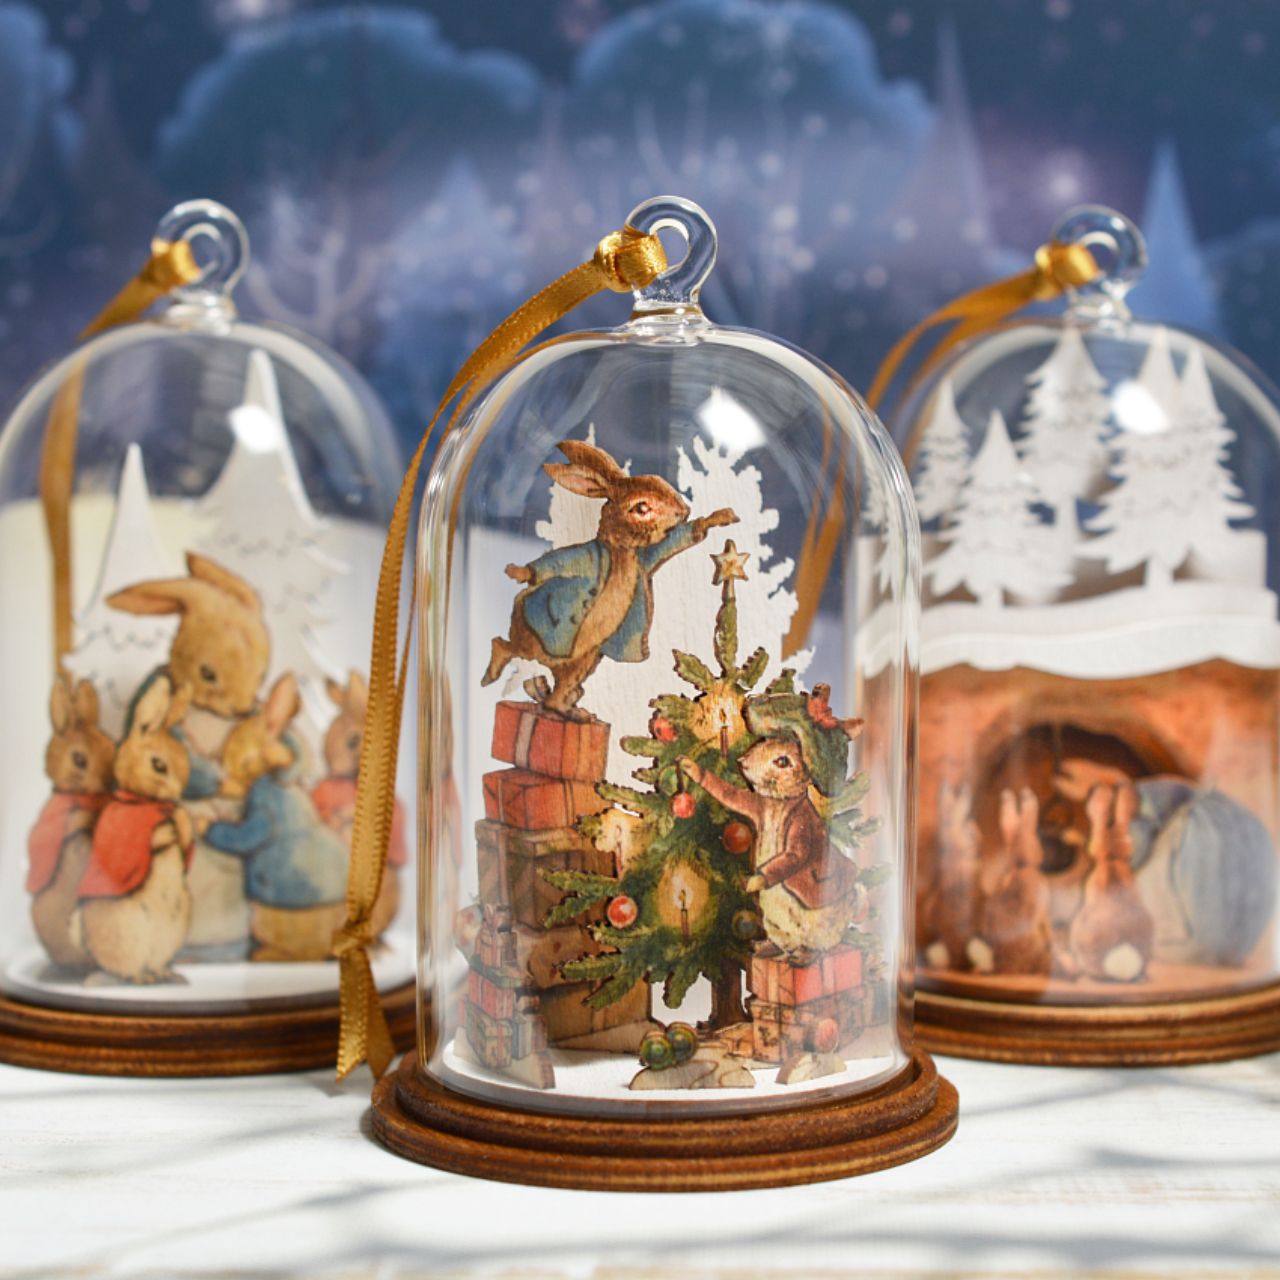 Beatrix Potter Peter Rabbit and Family at Christmas Wooden Hanging Ornament  This festive Peter Rabbit and family wooden hanging ornament has been intricately created and comes encased in a beautiful eco-friendly glass dome. This classic vintage style helps bring to life the original illustrations from the Beatrix Potter stories.